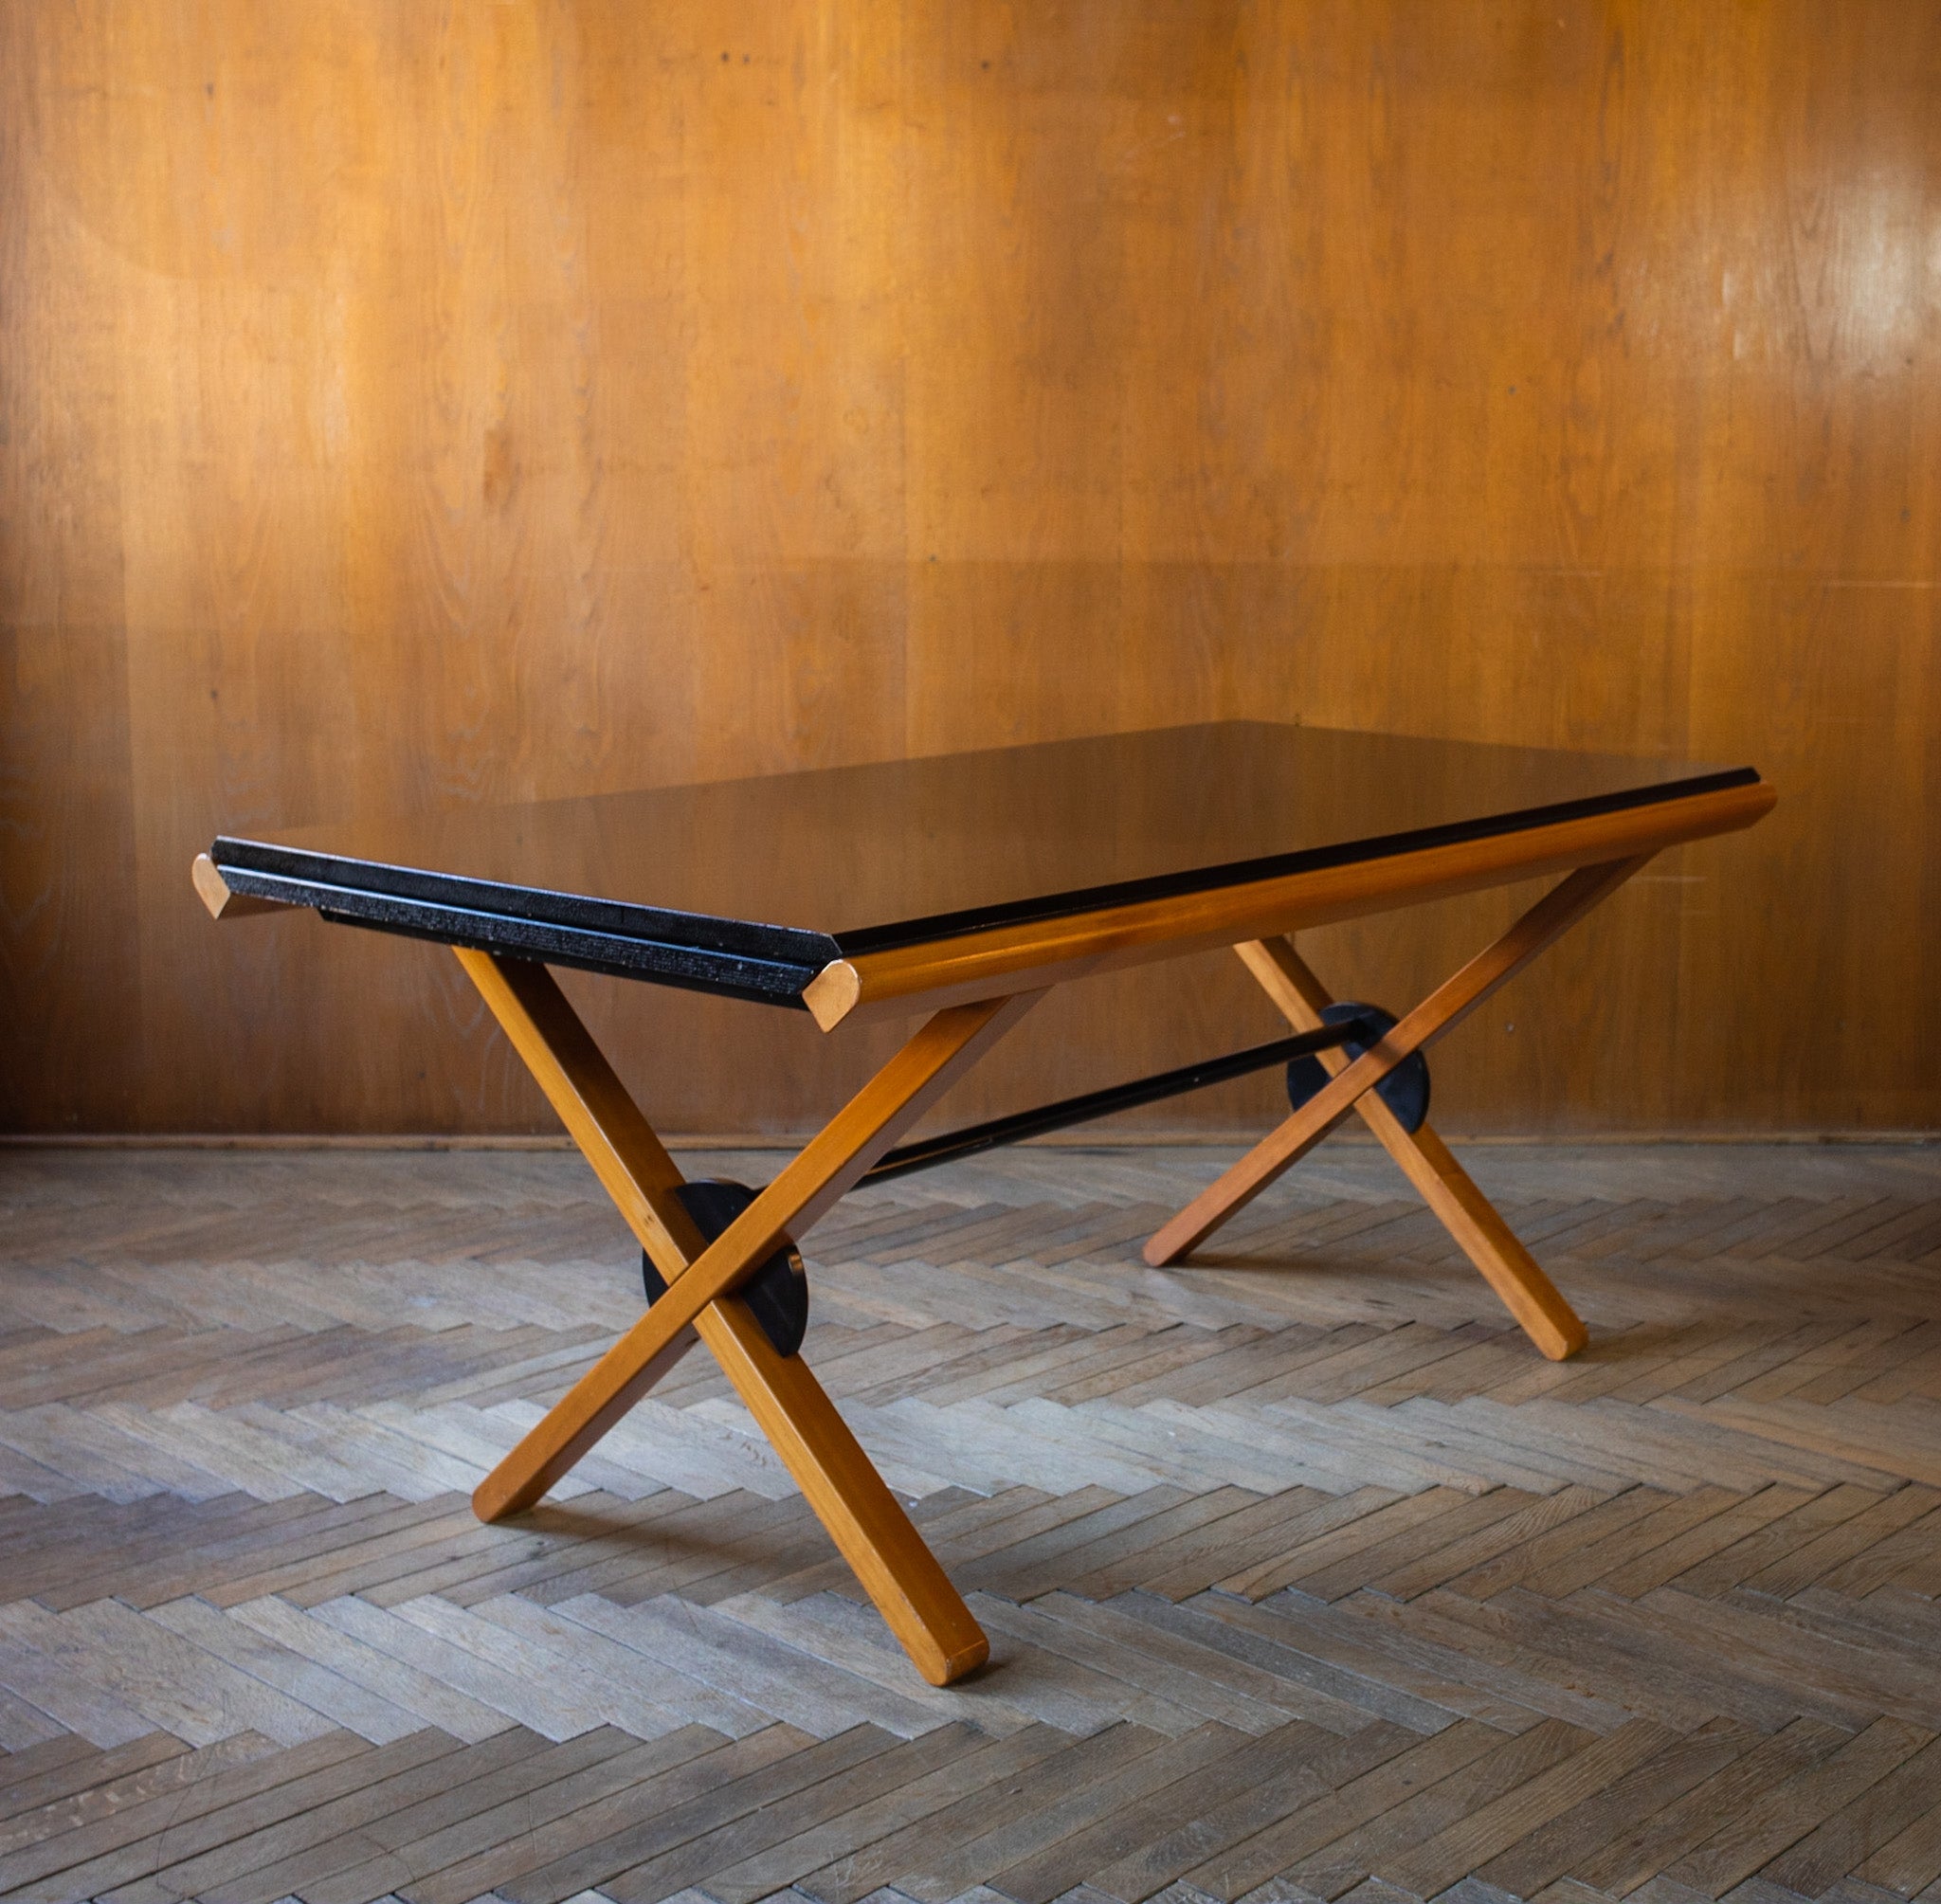 Post-Modern black brown cherry wood extendable dining table by Gianfranco Frattini, Italy 1980.

This black and oak painted cherry wood dining table designed by one of the most famous Italian architects and creators Gianfranco Frattini for the